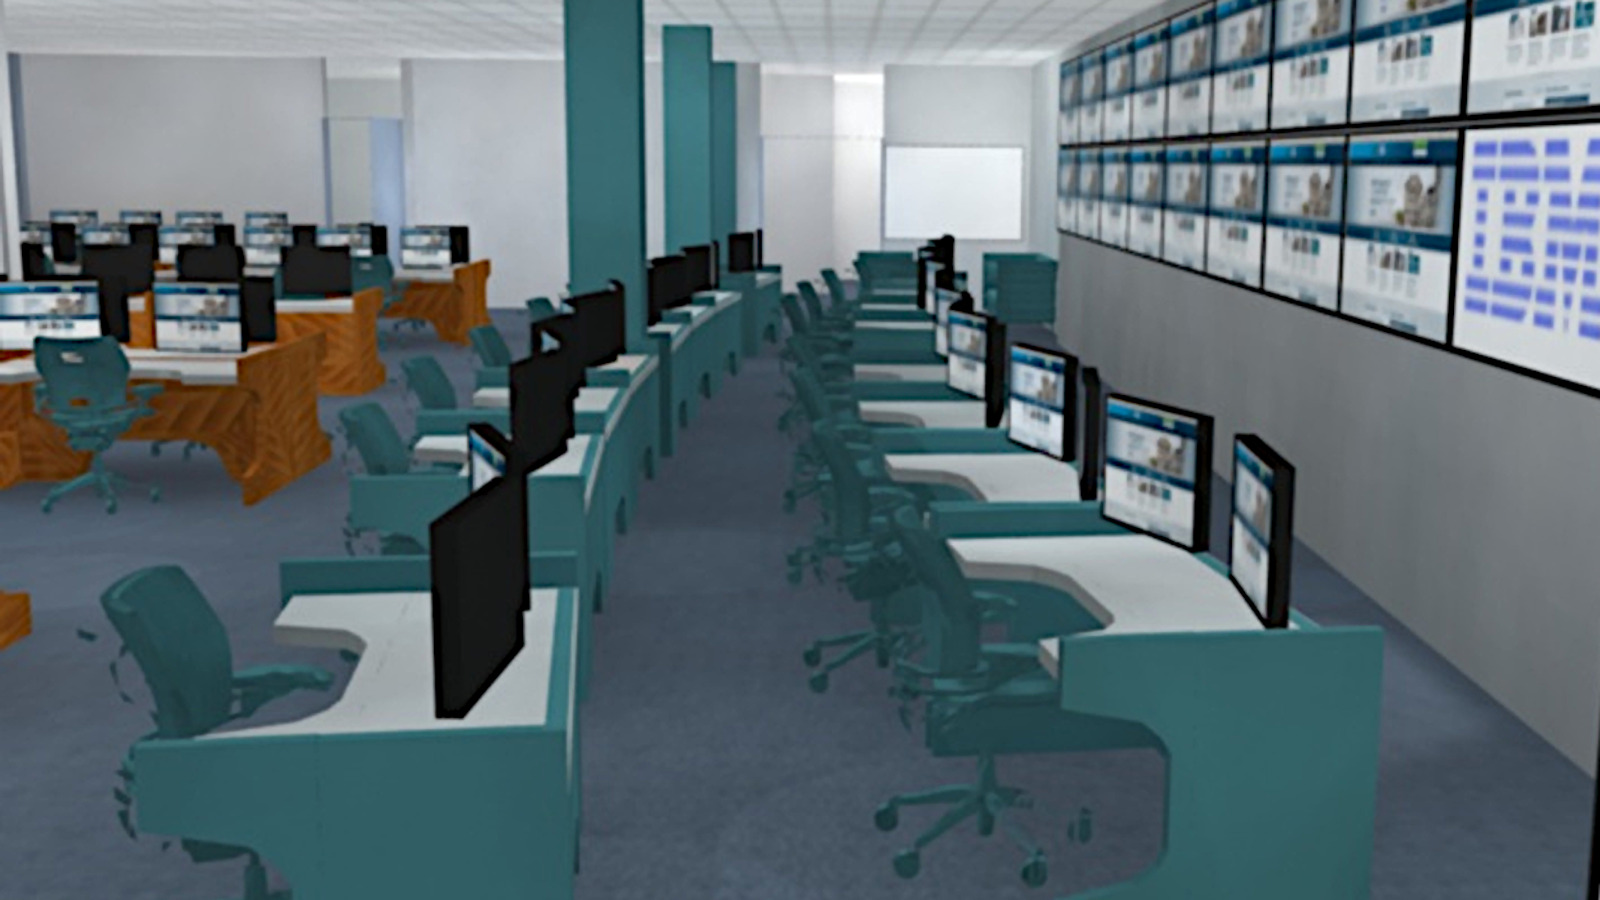 a large room containing many technical workstations, and on the right a wall with two long rows of flat panel displays